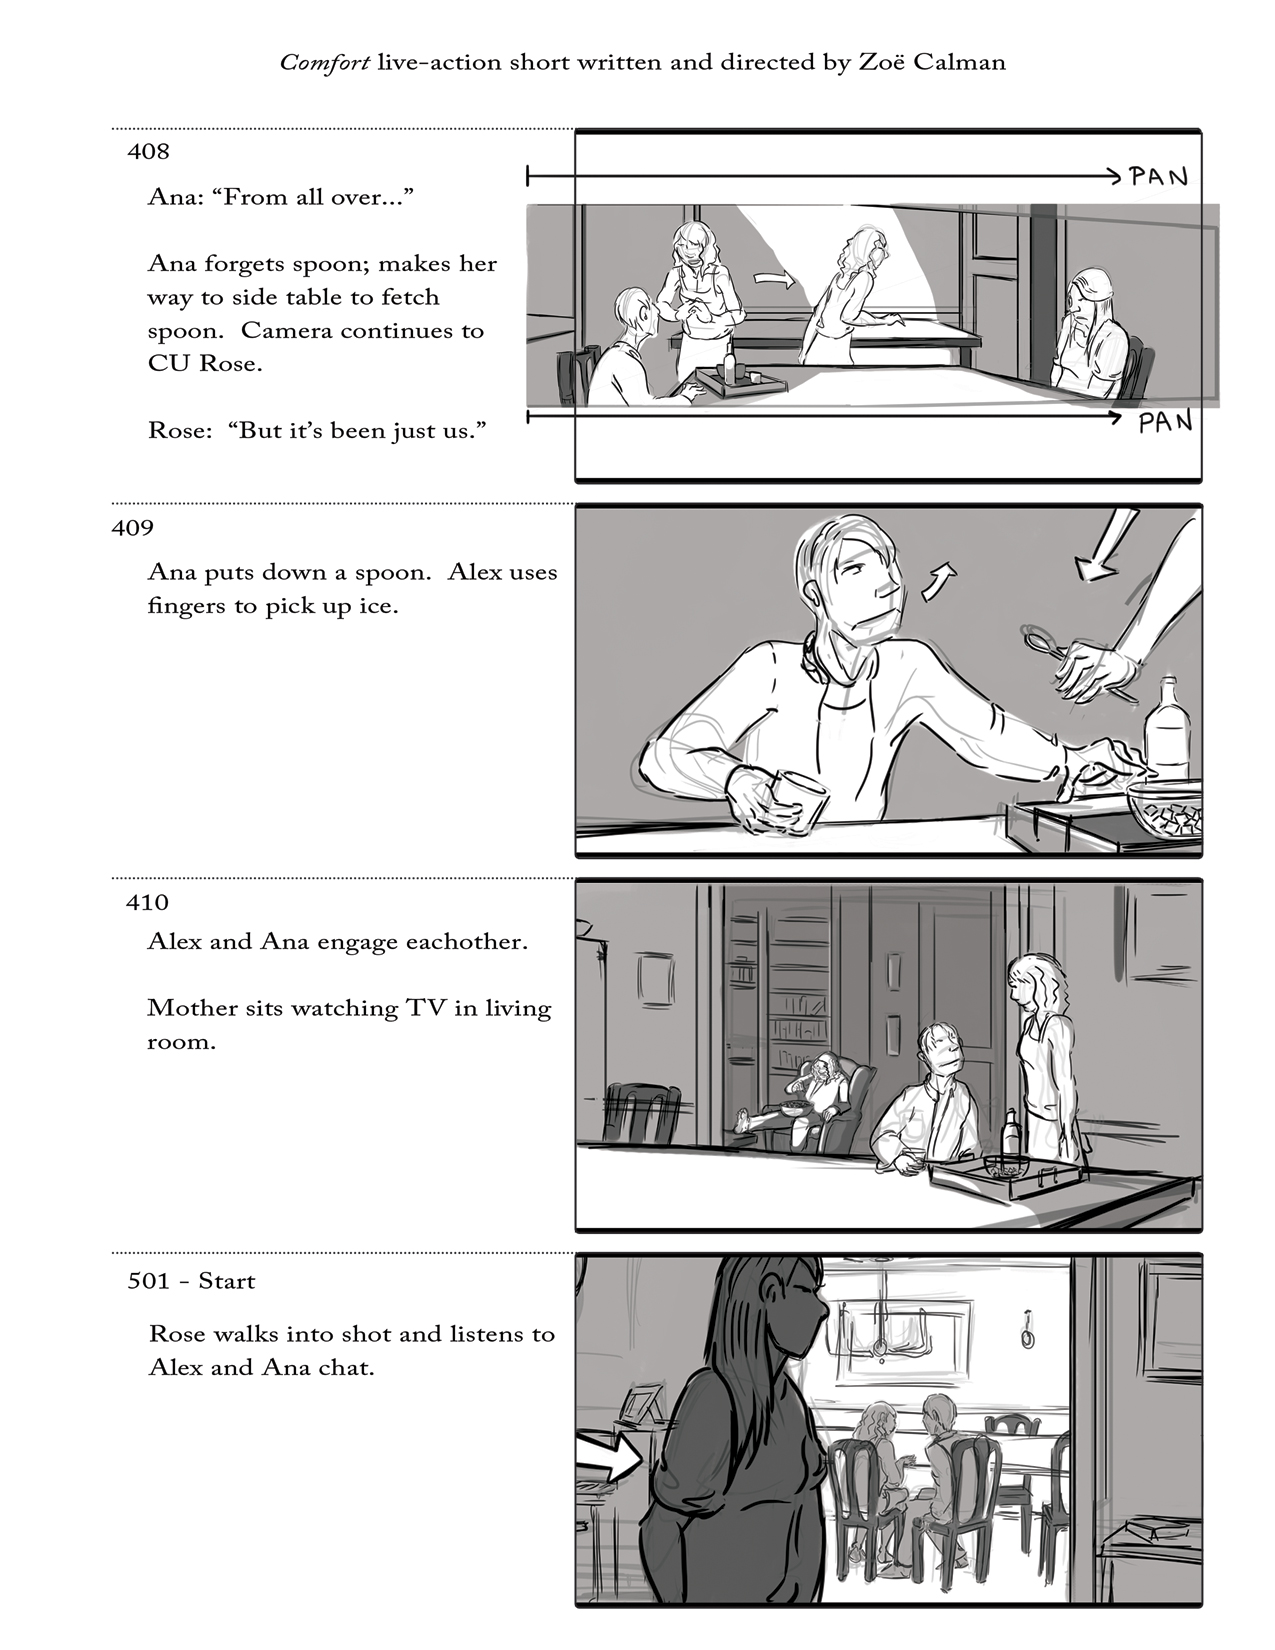 All-live-action-storyboards-with-new-vertical-format-20